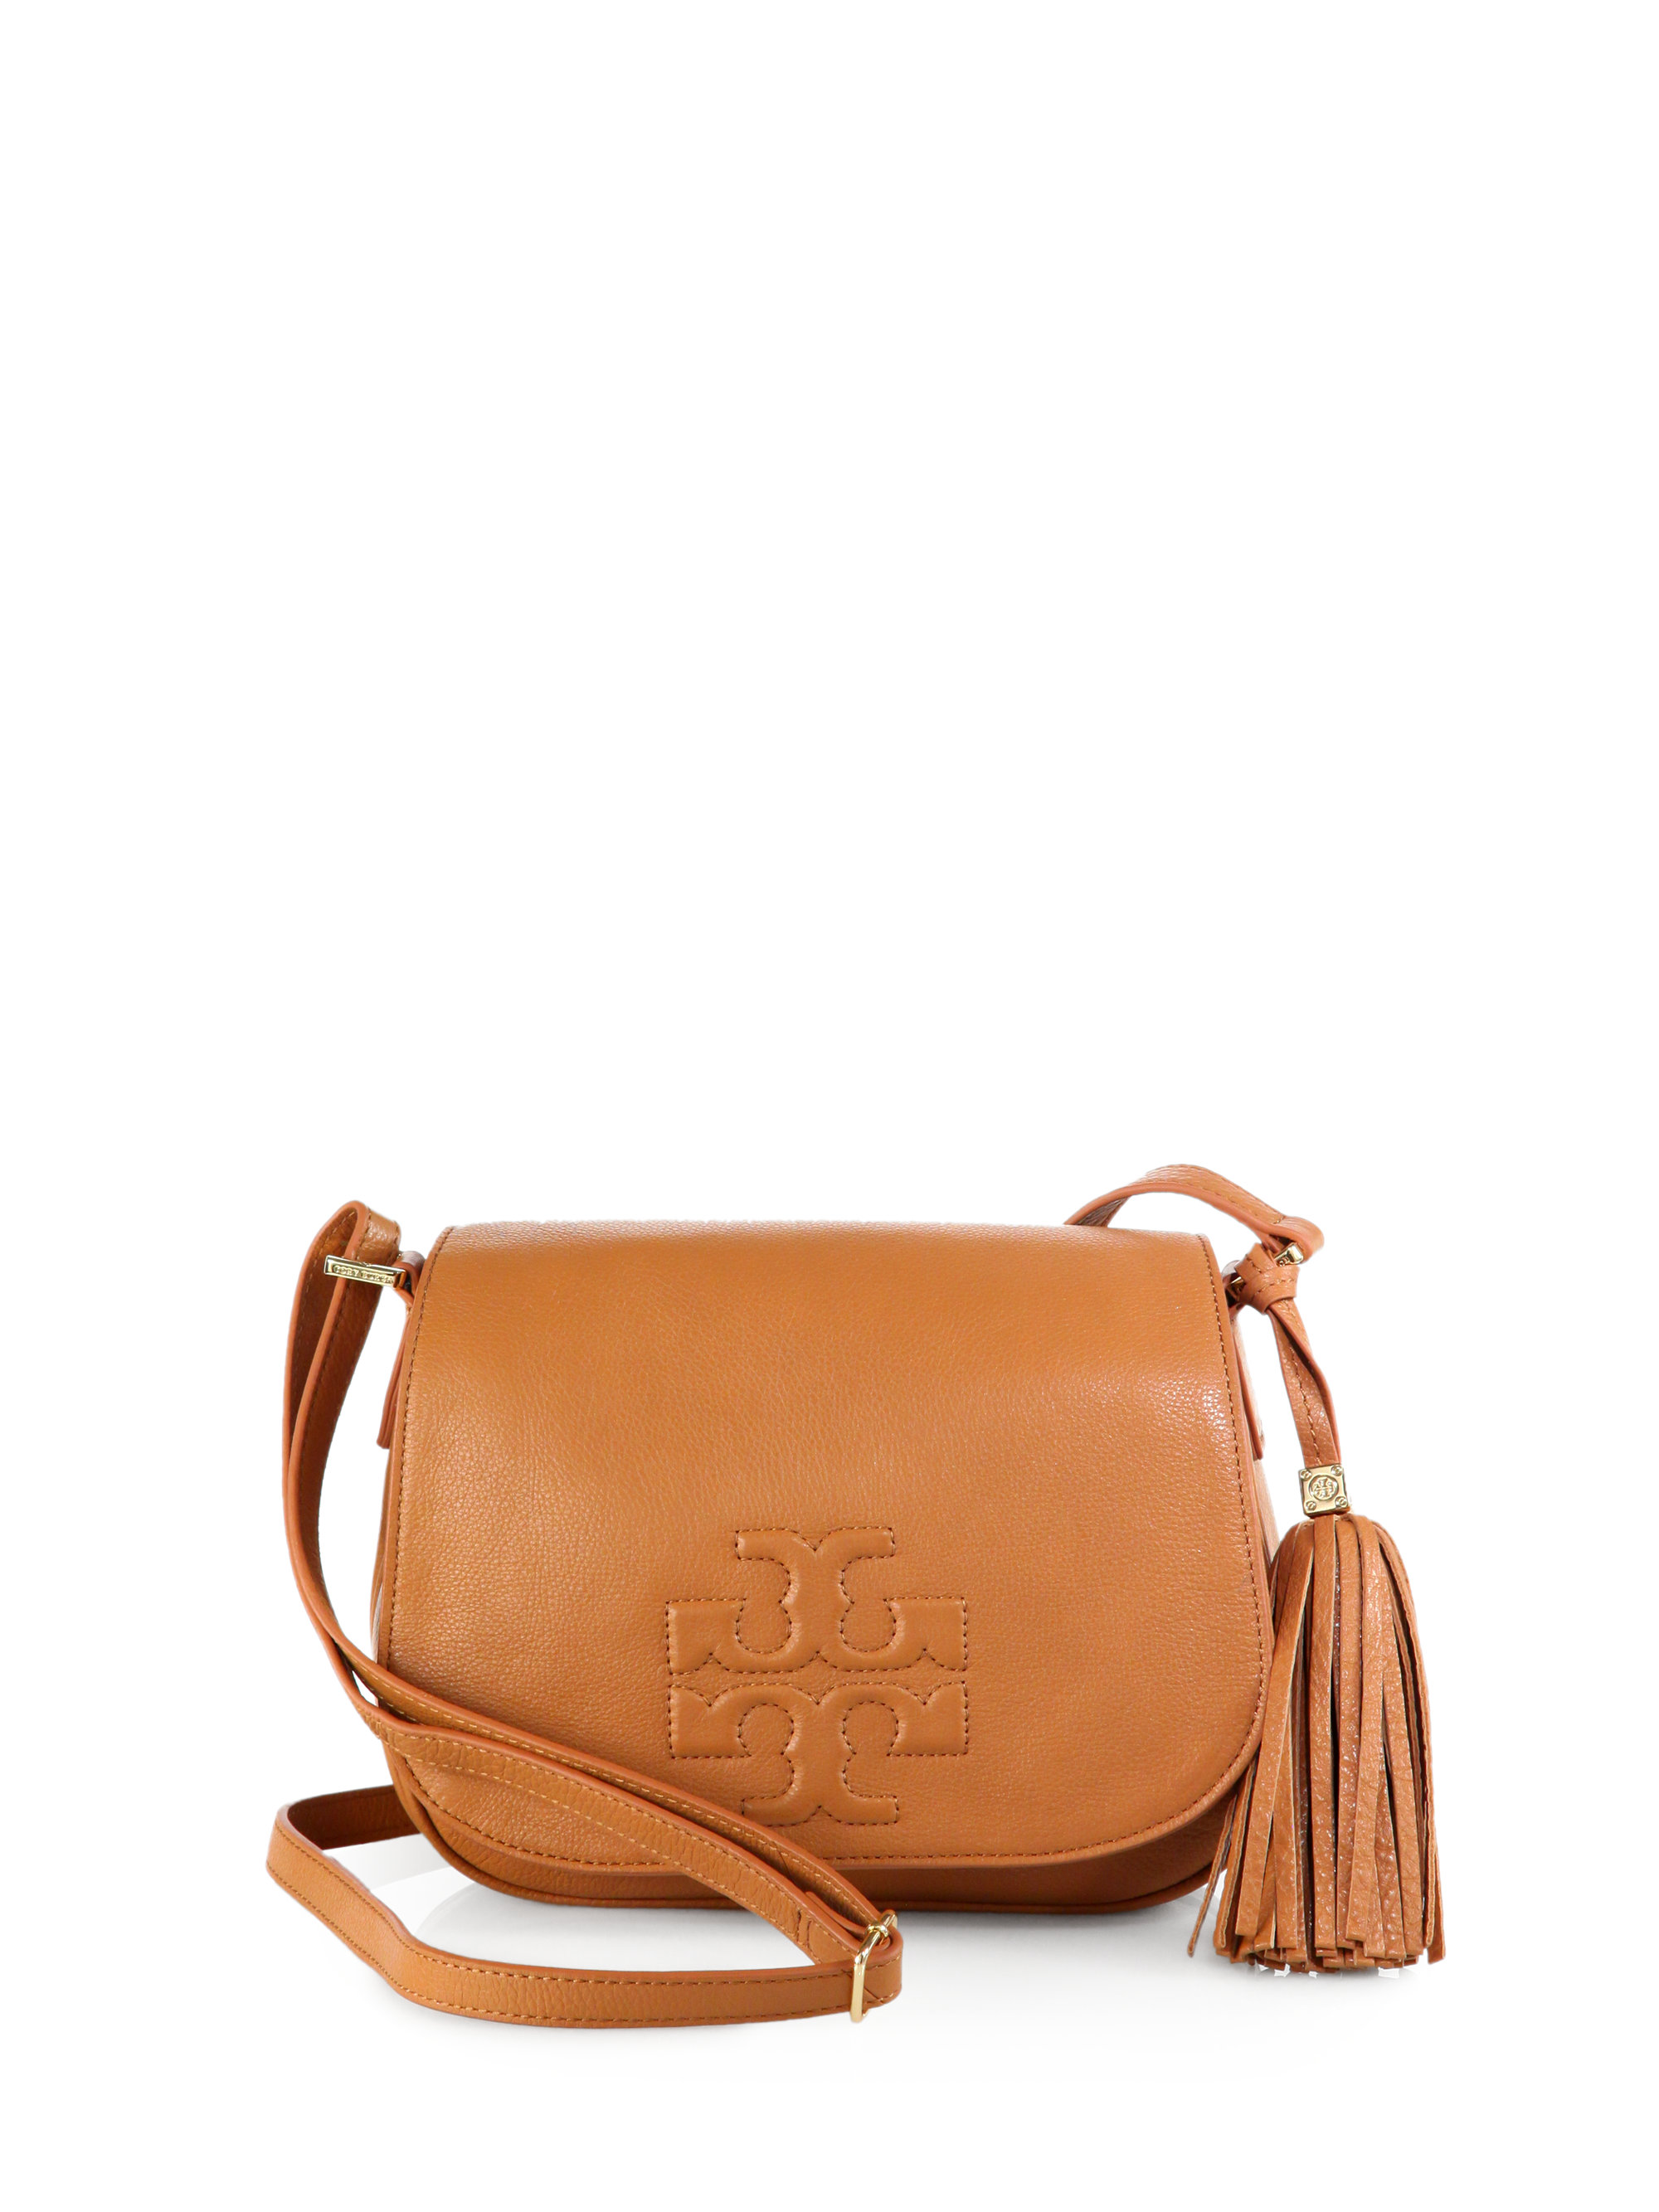 Tory Burch Thea Leather Fringe Crossbody Bag in Brown | Lyst